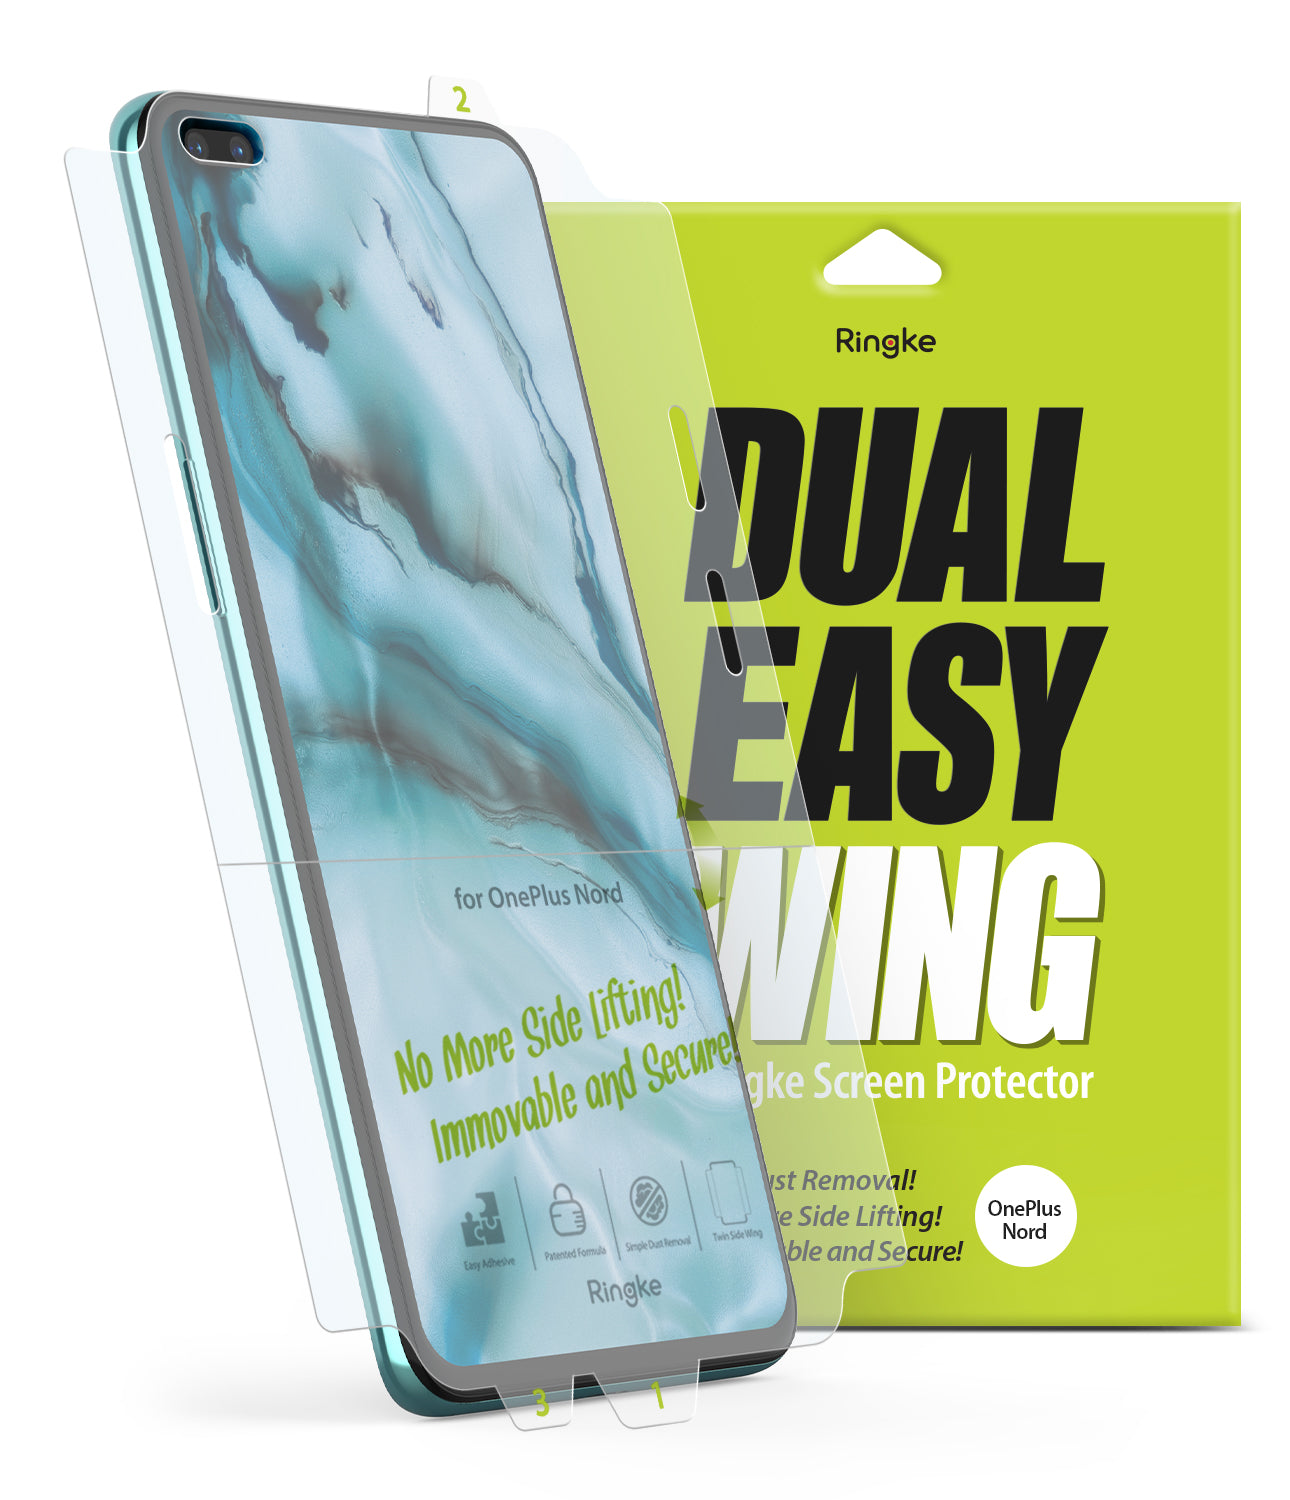 oneplus nord screen protector - ringke dual easy film wing